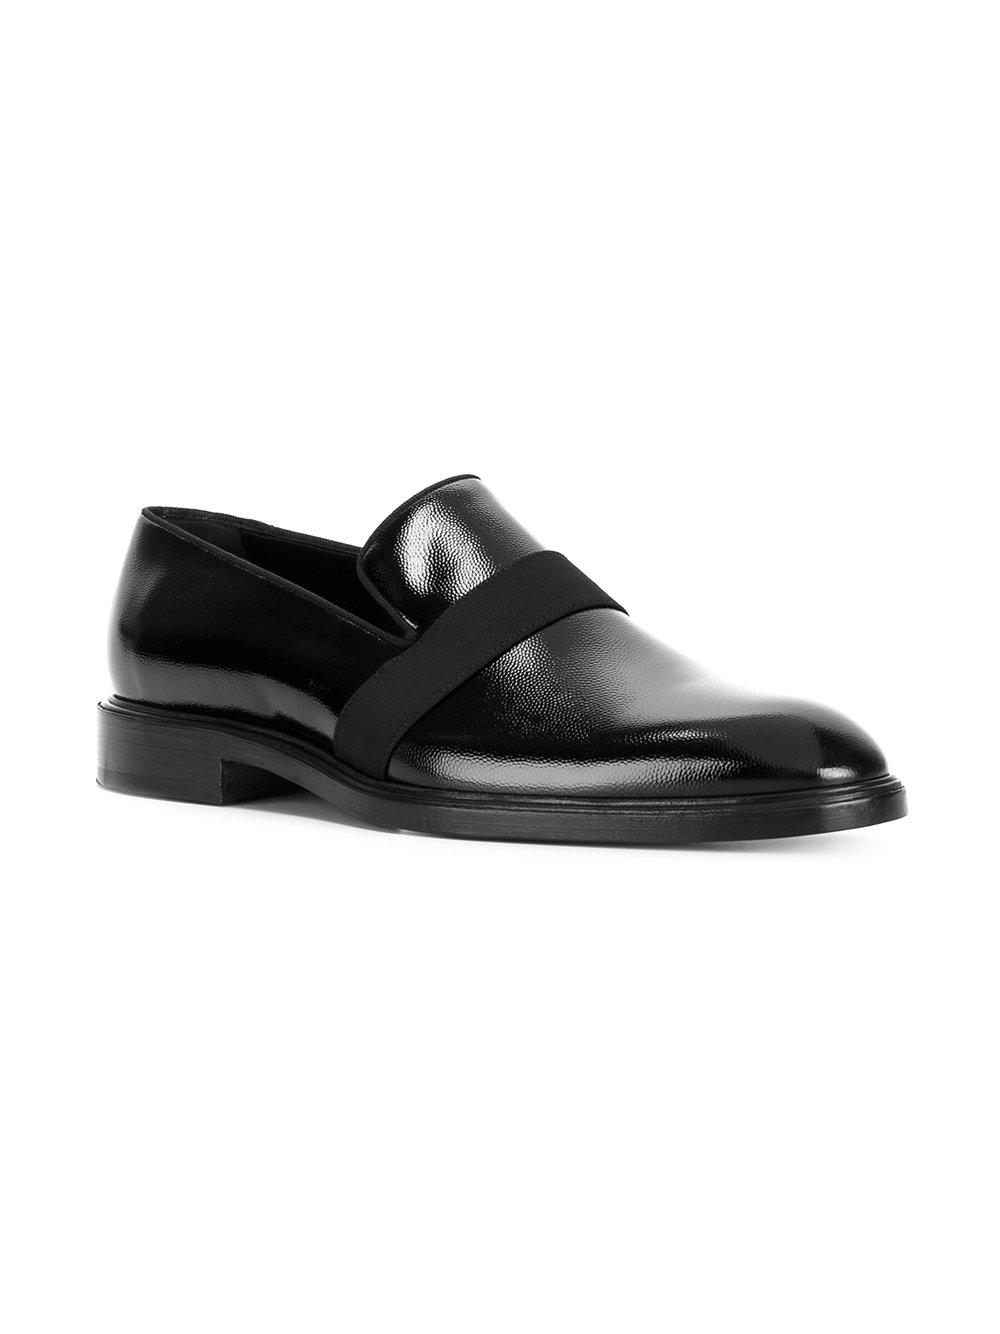 Lyst - Givenchy Slip-on Loafers in Black for Men